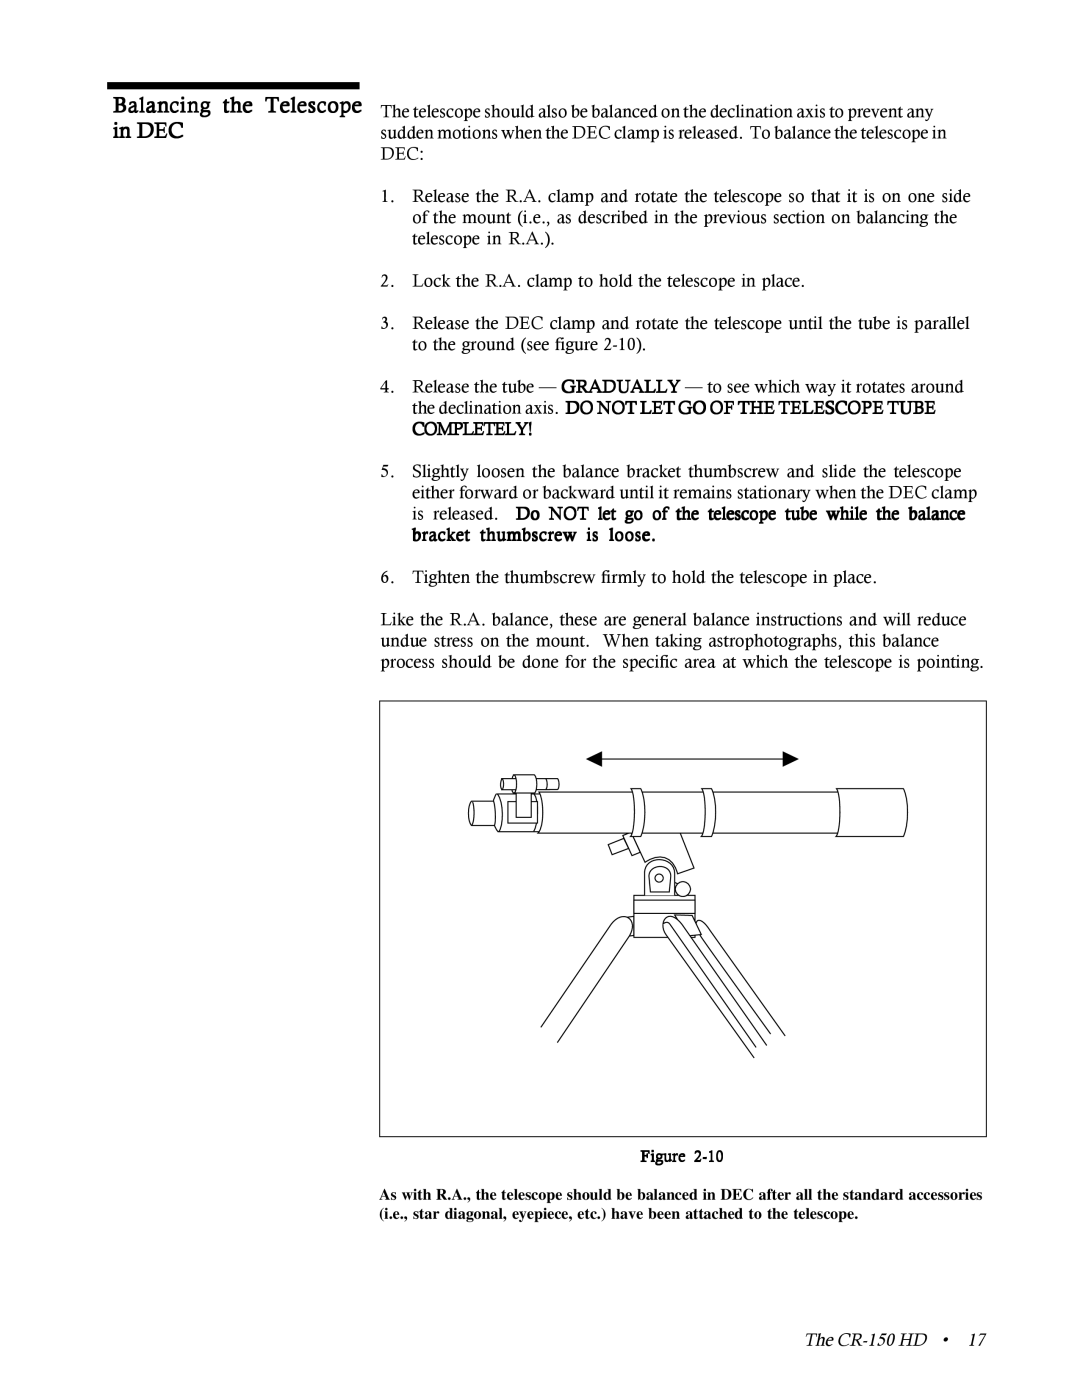 Celestron CR-150 HD instruction manual Balancing the Telescope in DEC, Completely, The CR-150HD 